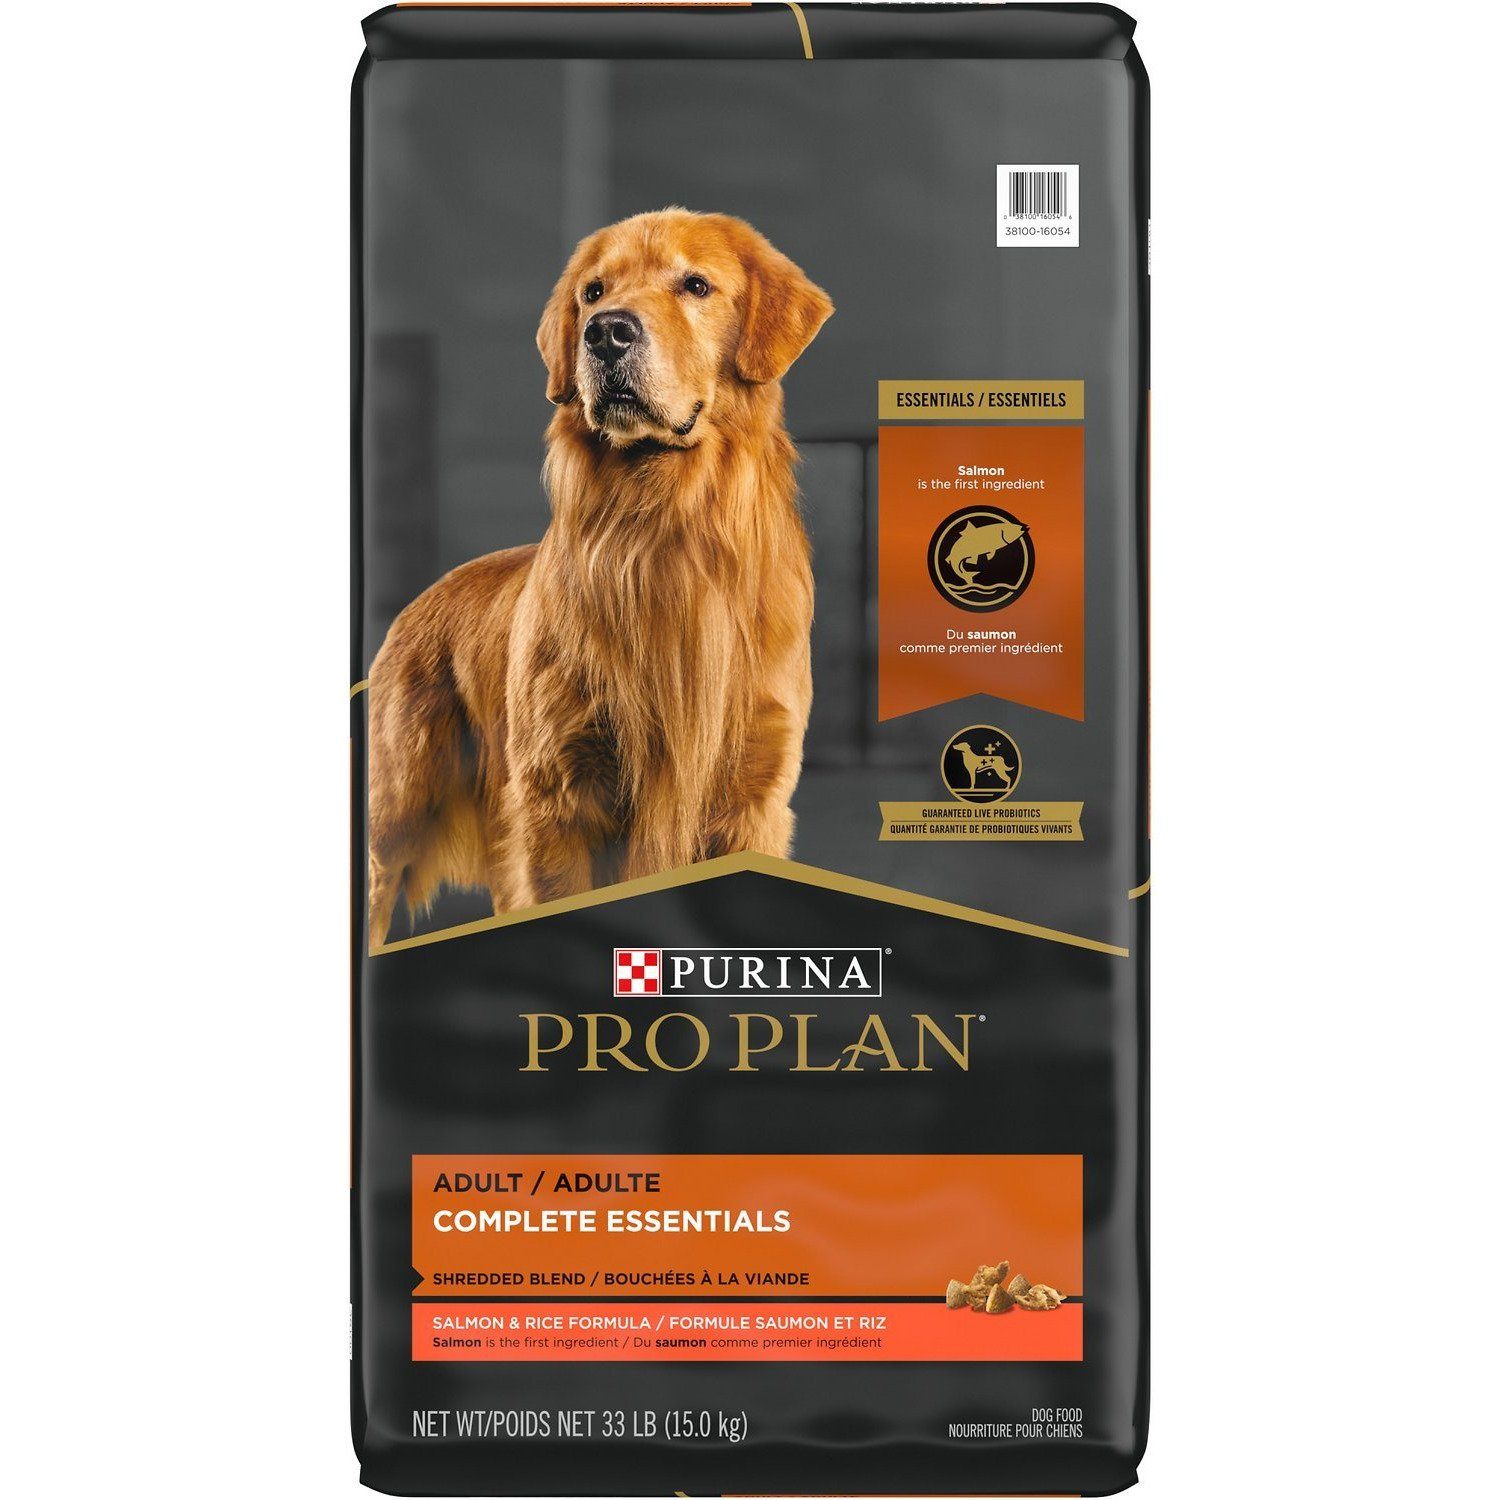 Purina Pro Plan High Protein Dog Food With Probiotics for Dogs Shredded Blend Salmon & Rice Formula 15 Kg Dog Food 15 Kg | PetMax Canada